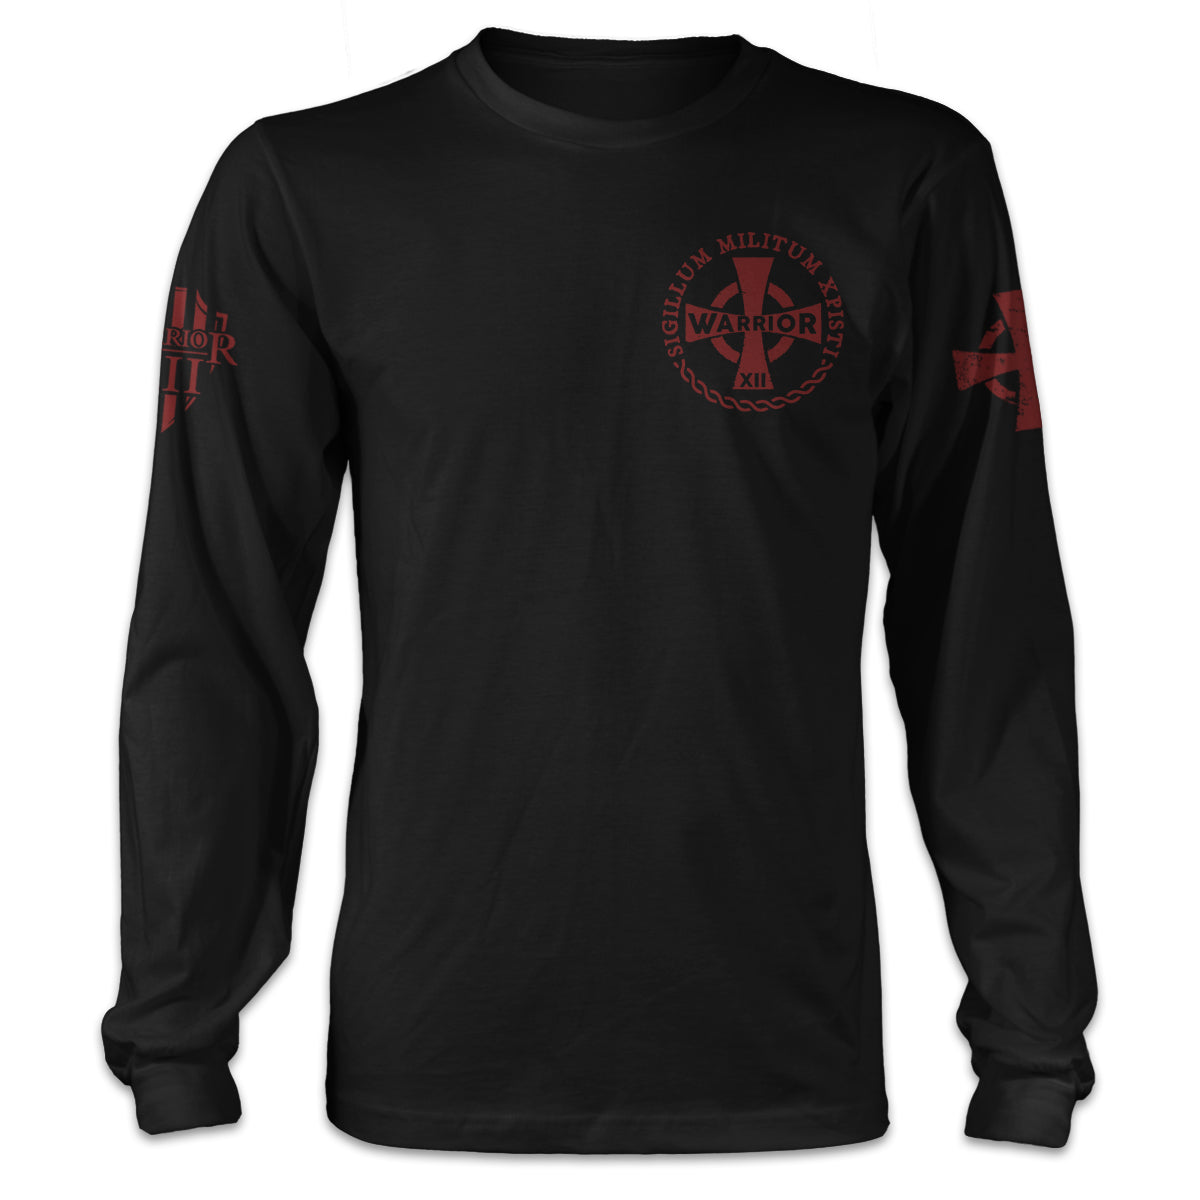 A black long sleeved shirt with the cross emblem printed on the front.